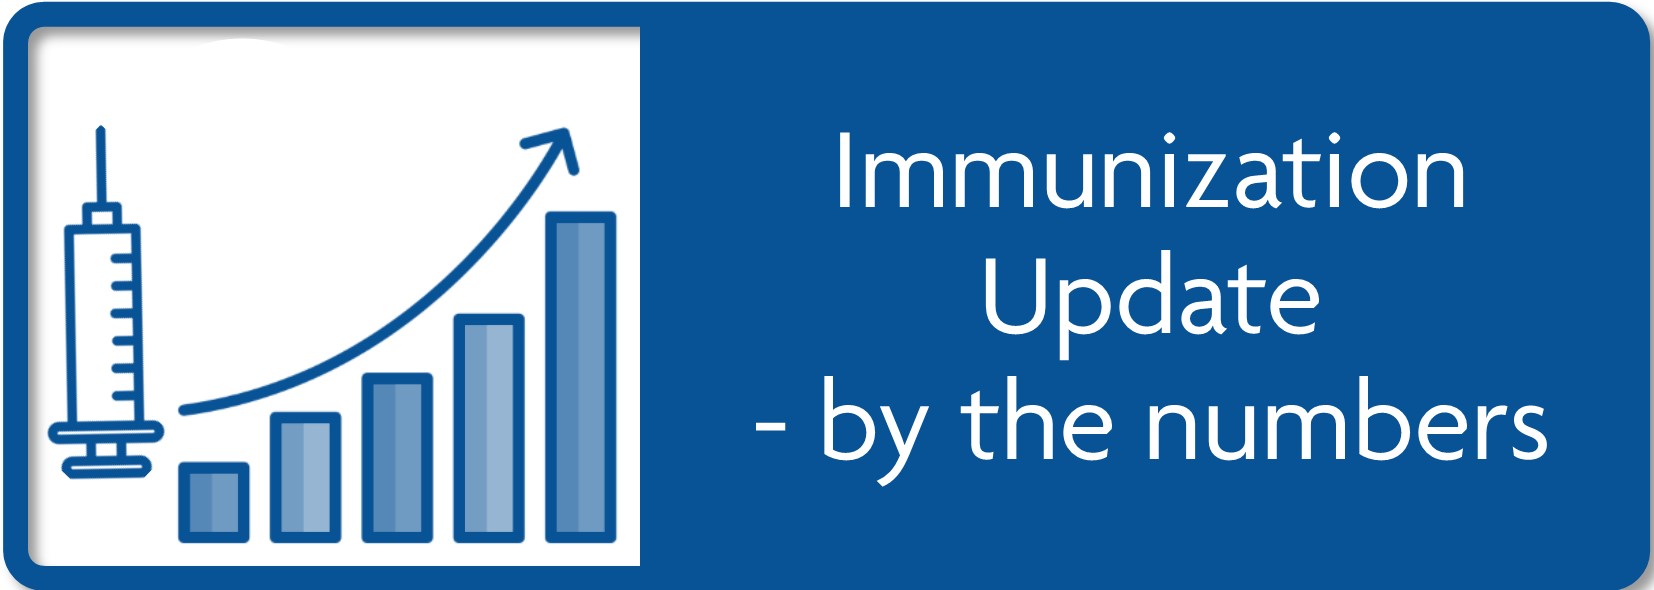 Immunization Update - by the numbers